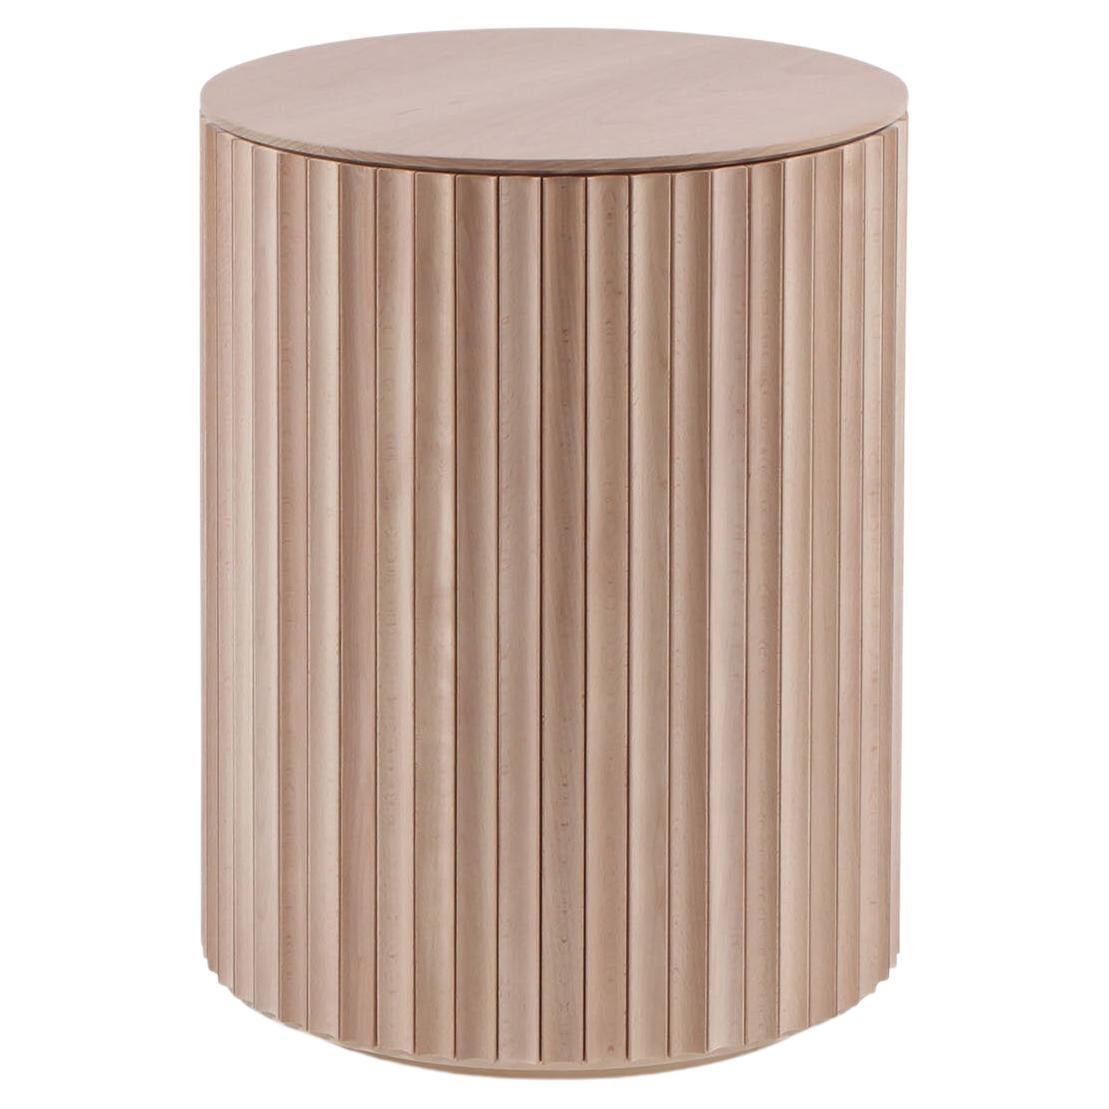 Pilar Round End Table / Bleached Maple Wood by INDO- For Sale